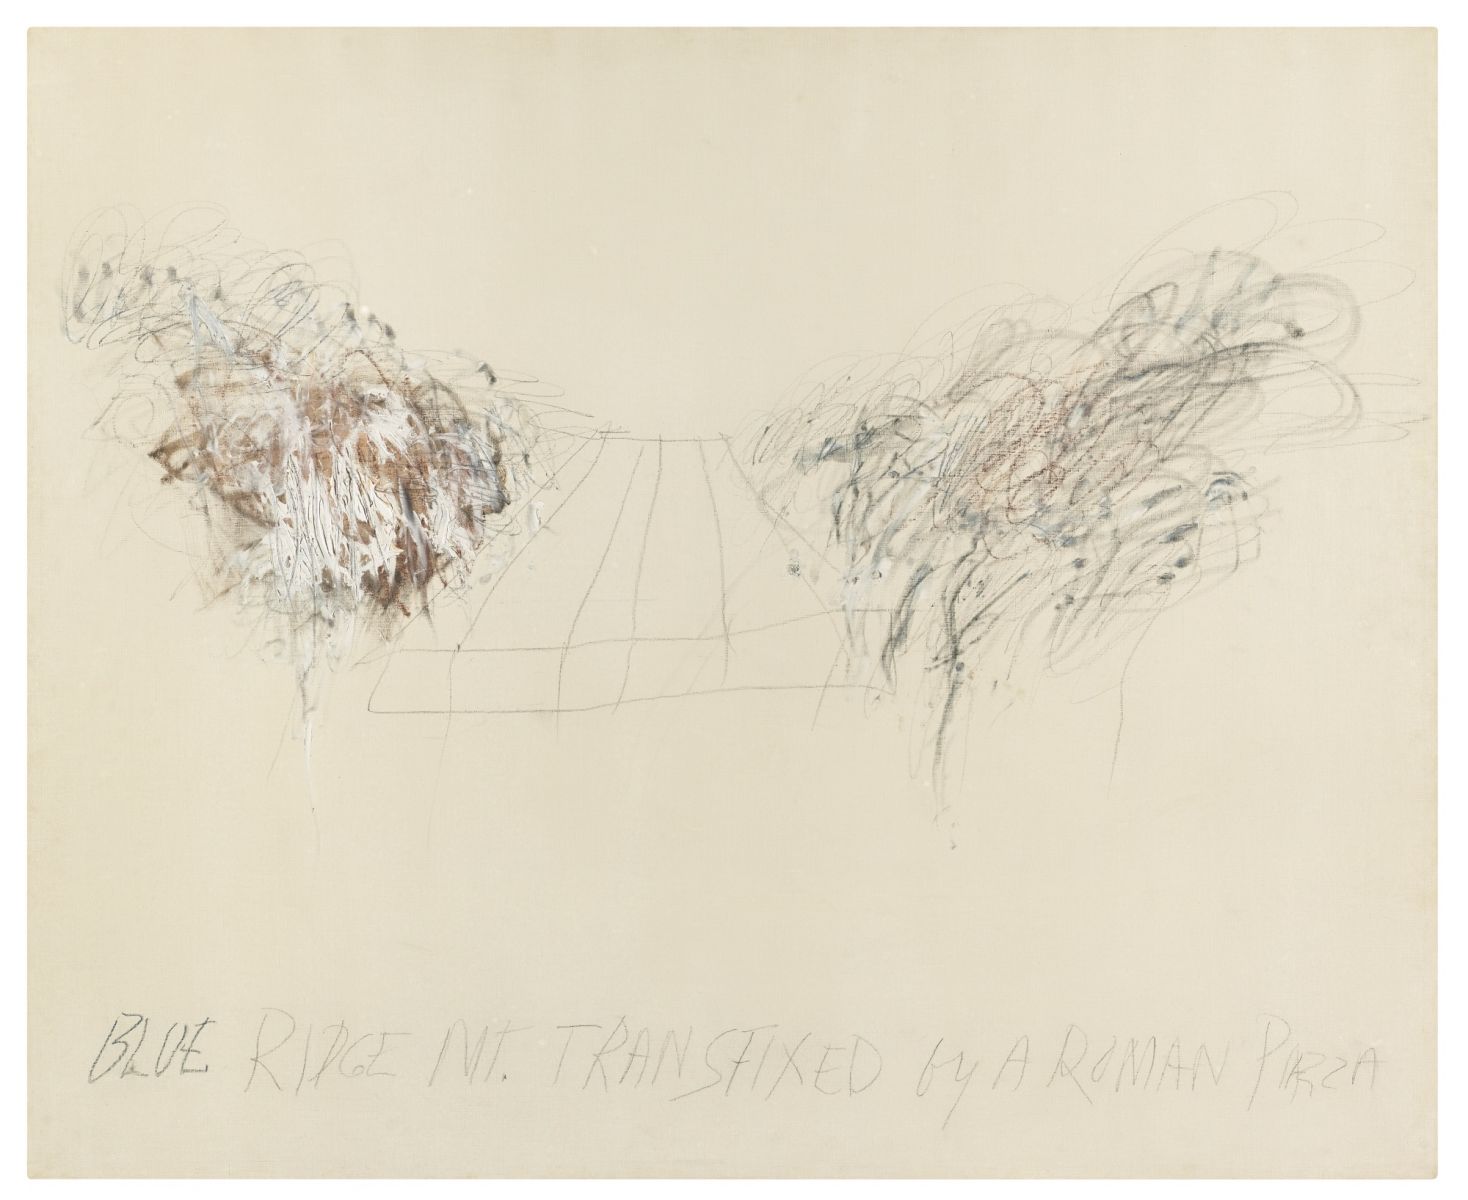 CY TWOMBLY, Blue Ridge Mountains transfixed by a Roman piazza